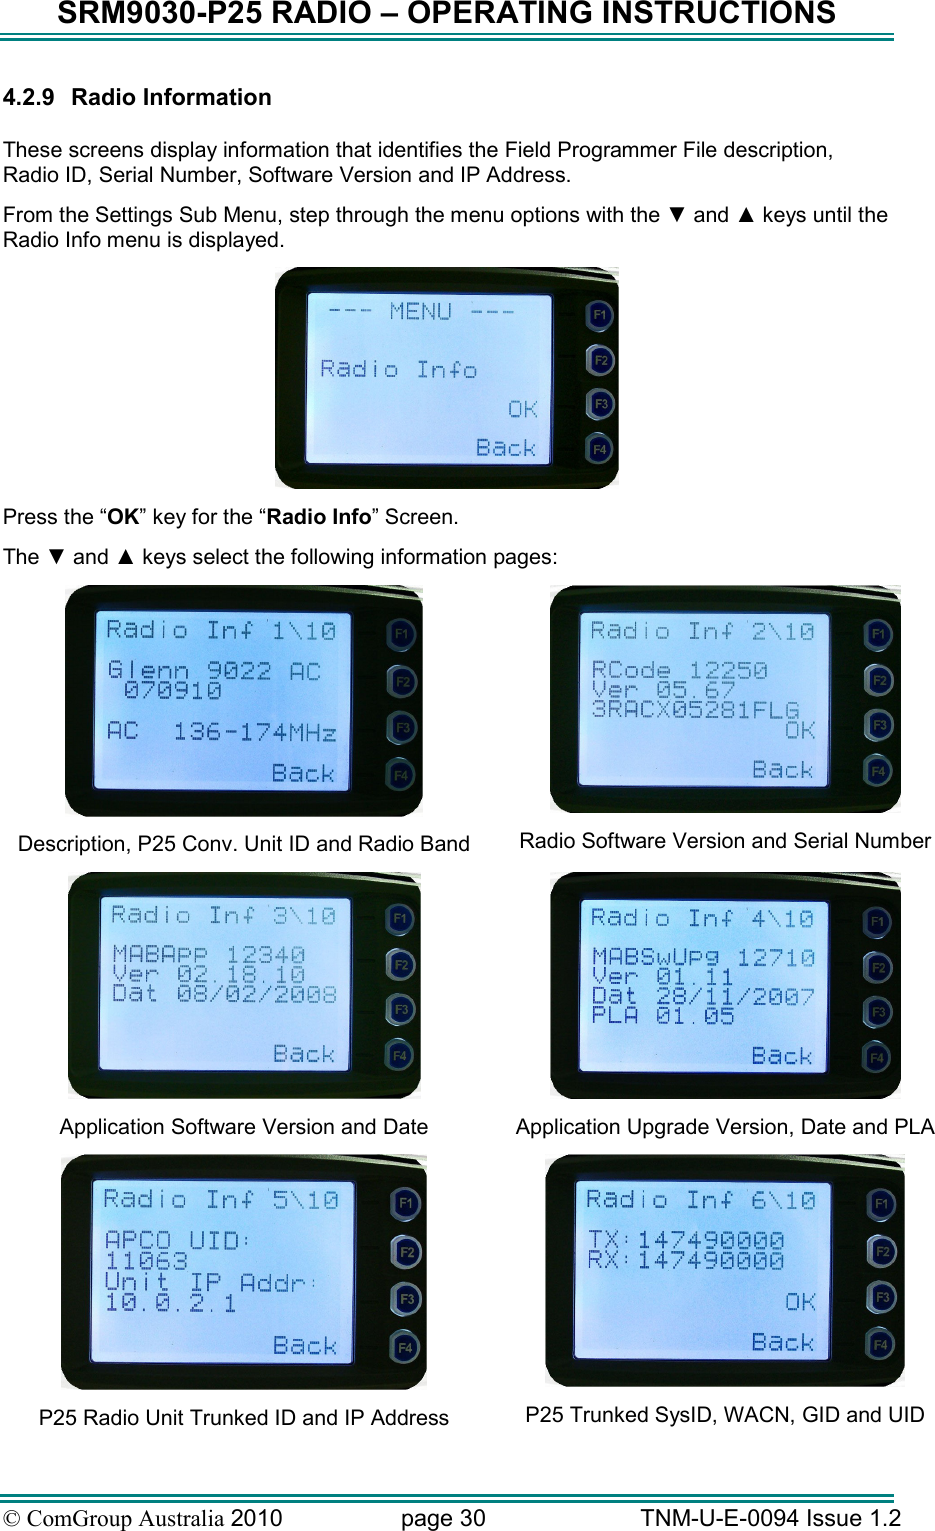 SRM9030-P25 RADIO – OPERATING INSTRUCTIONS © ComGroup Australia 2010  page 30   TNM-U-E-0094 Issue 1.2 4.2.9  Radio Information  These screens display information that identifies the Field Programmer File description, Radio ID, Serial Number, Software Version and IP Address.   From the Settings Sub Menu, step through the menu options with the ▼ and ▲ keys until the Radio Info menu is displayed.  Press the “OK” key for the “Radio Info” Screen. The ▼ and ▲ keys select the following information pages:  Description, P25 Conv. Unit ID and Radio Band  Radio Software Version and Serial Number  Application Software Version and Date  Application Upgrade Version, Date and PLA   P25 Radio Unit Trunked ID and IP Address  P25 Trunked SysID, WACN, GID and UID 